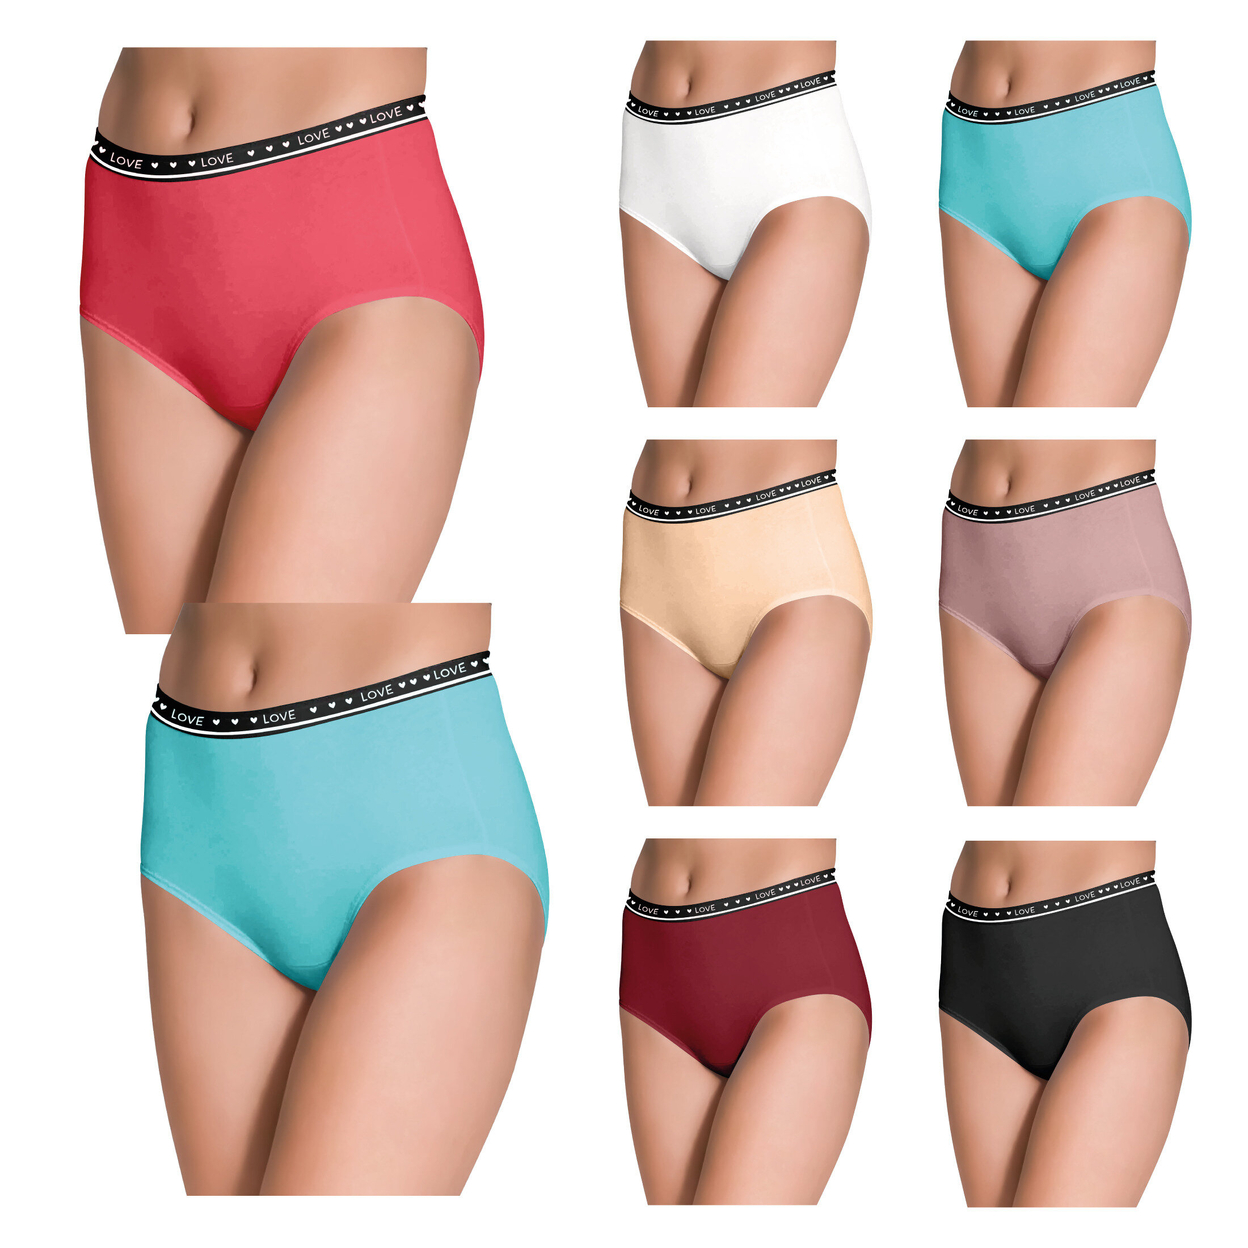 Multi-Pack: Women's Ultra Soft Moisture Wicking Panties Cotton Perfect Fit Underwear (Plus Sizes Available) - 12-Pack, Xx-large